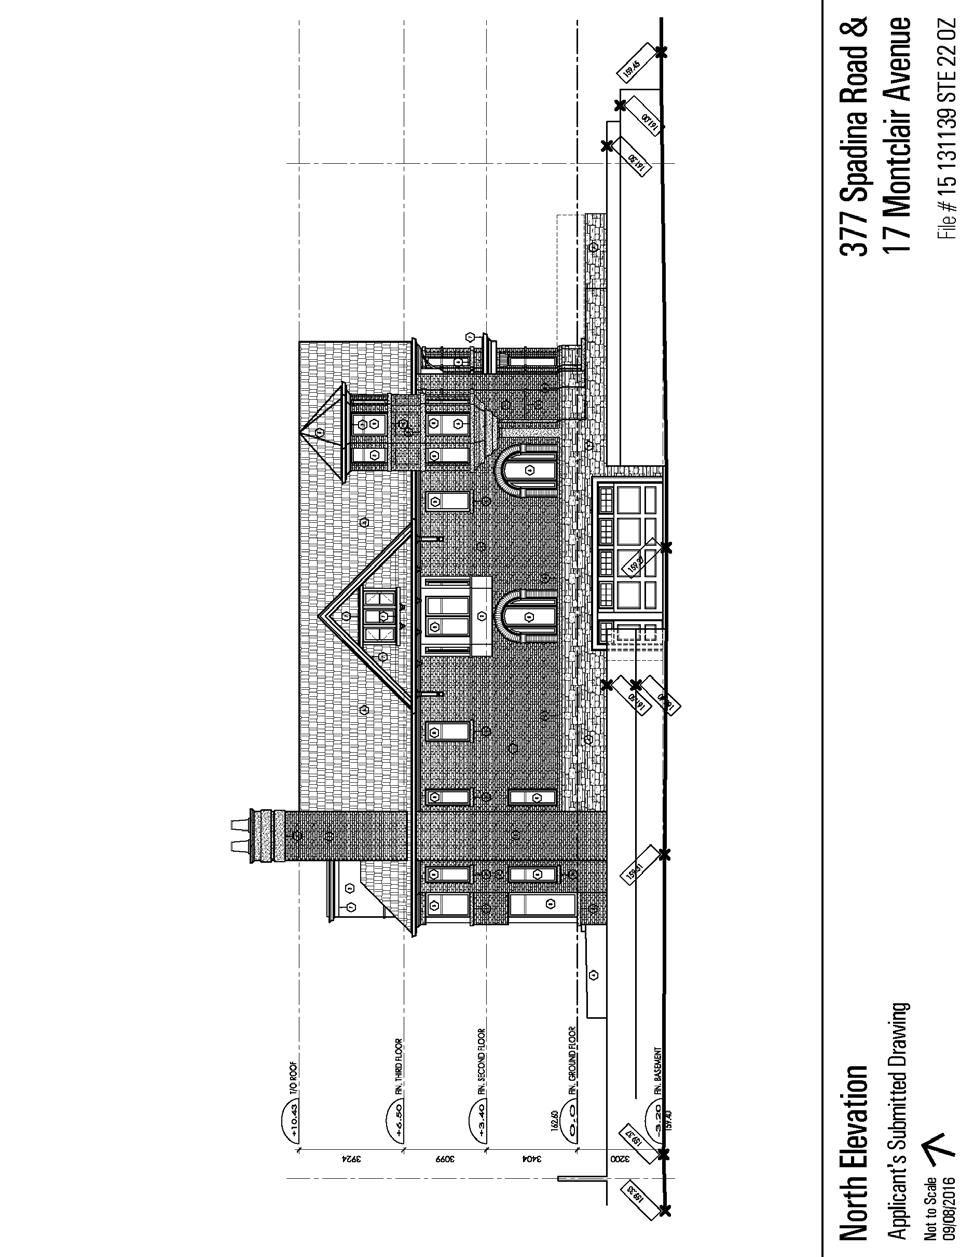 Attachment 5: North Elevation (Townhouses) Staff